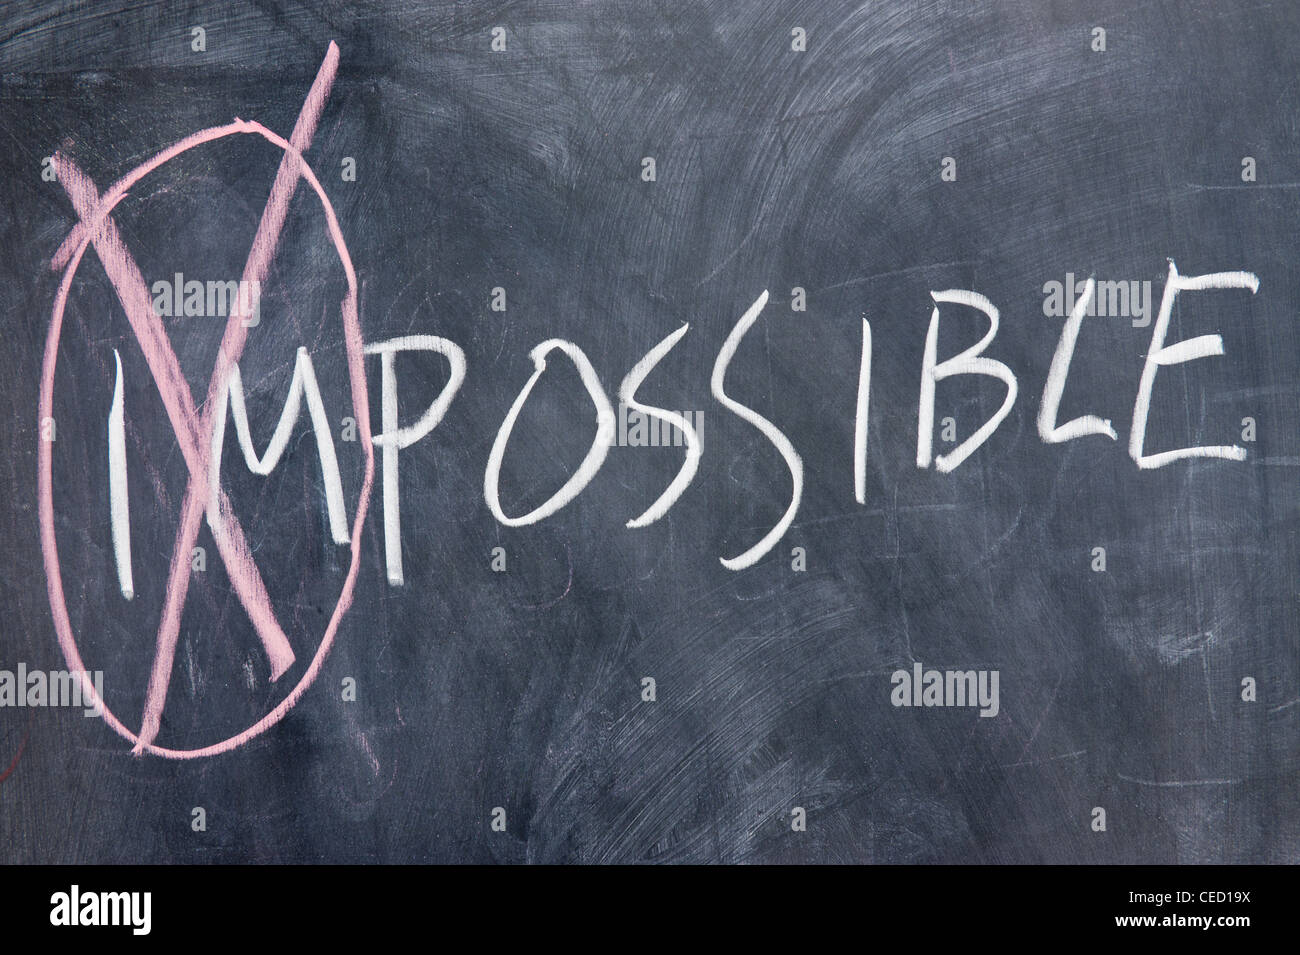 Chalkboard writing - concept of impossible or possible Stock Photo